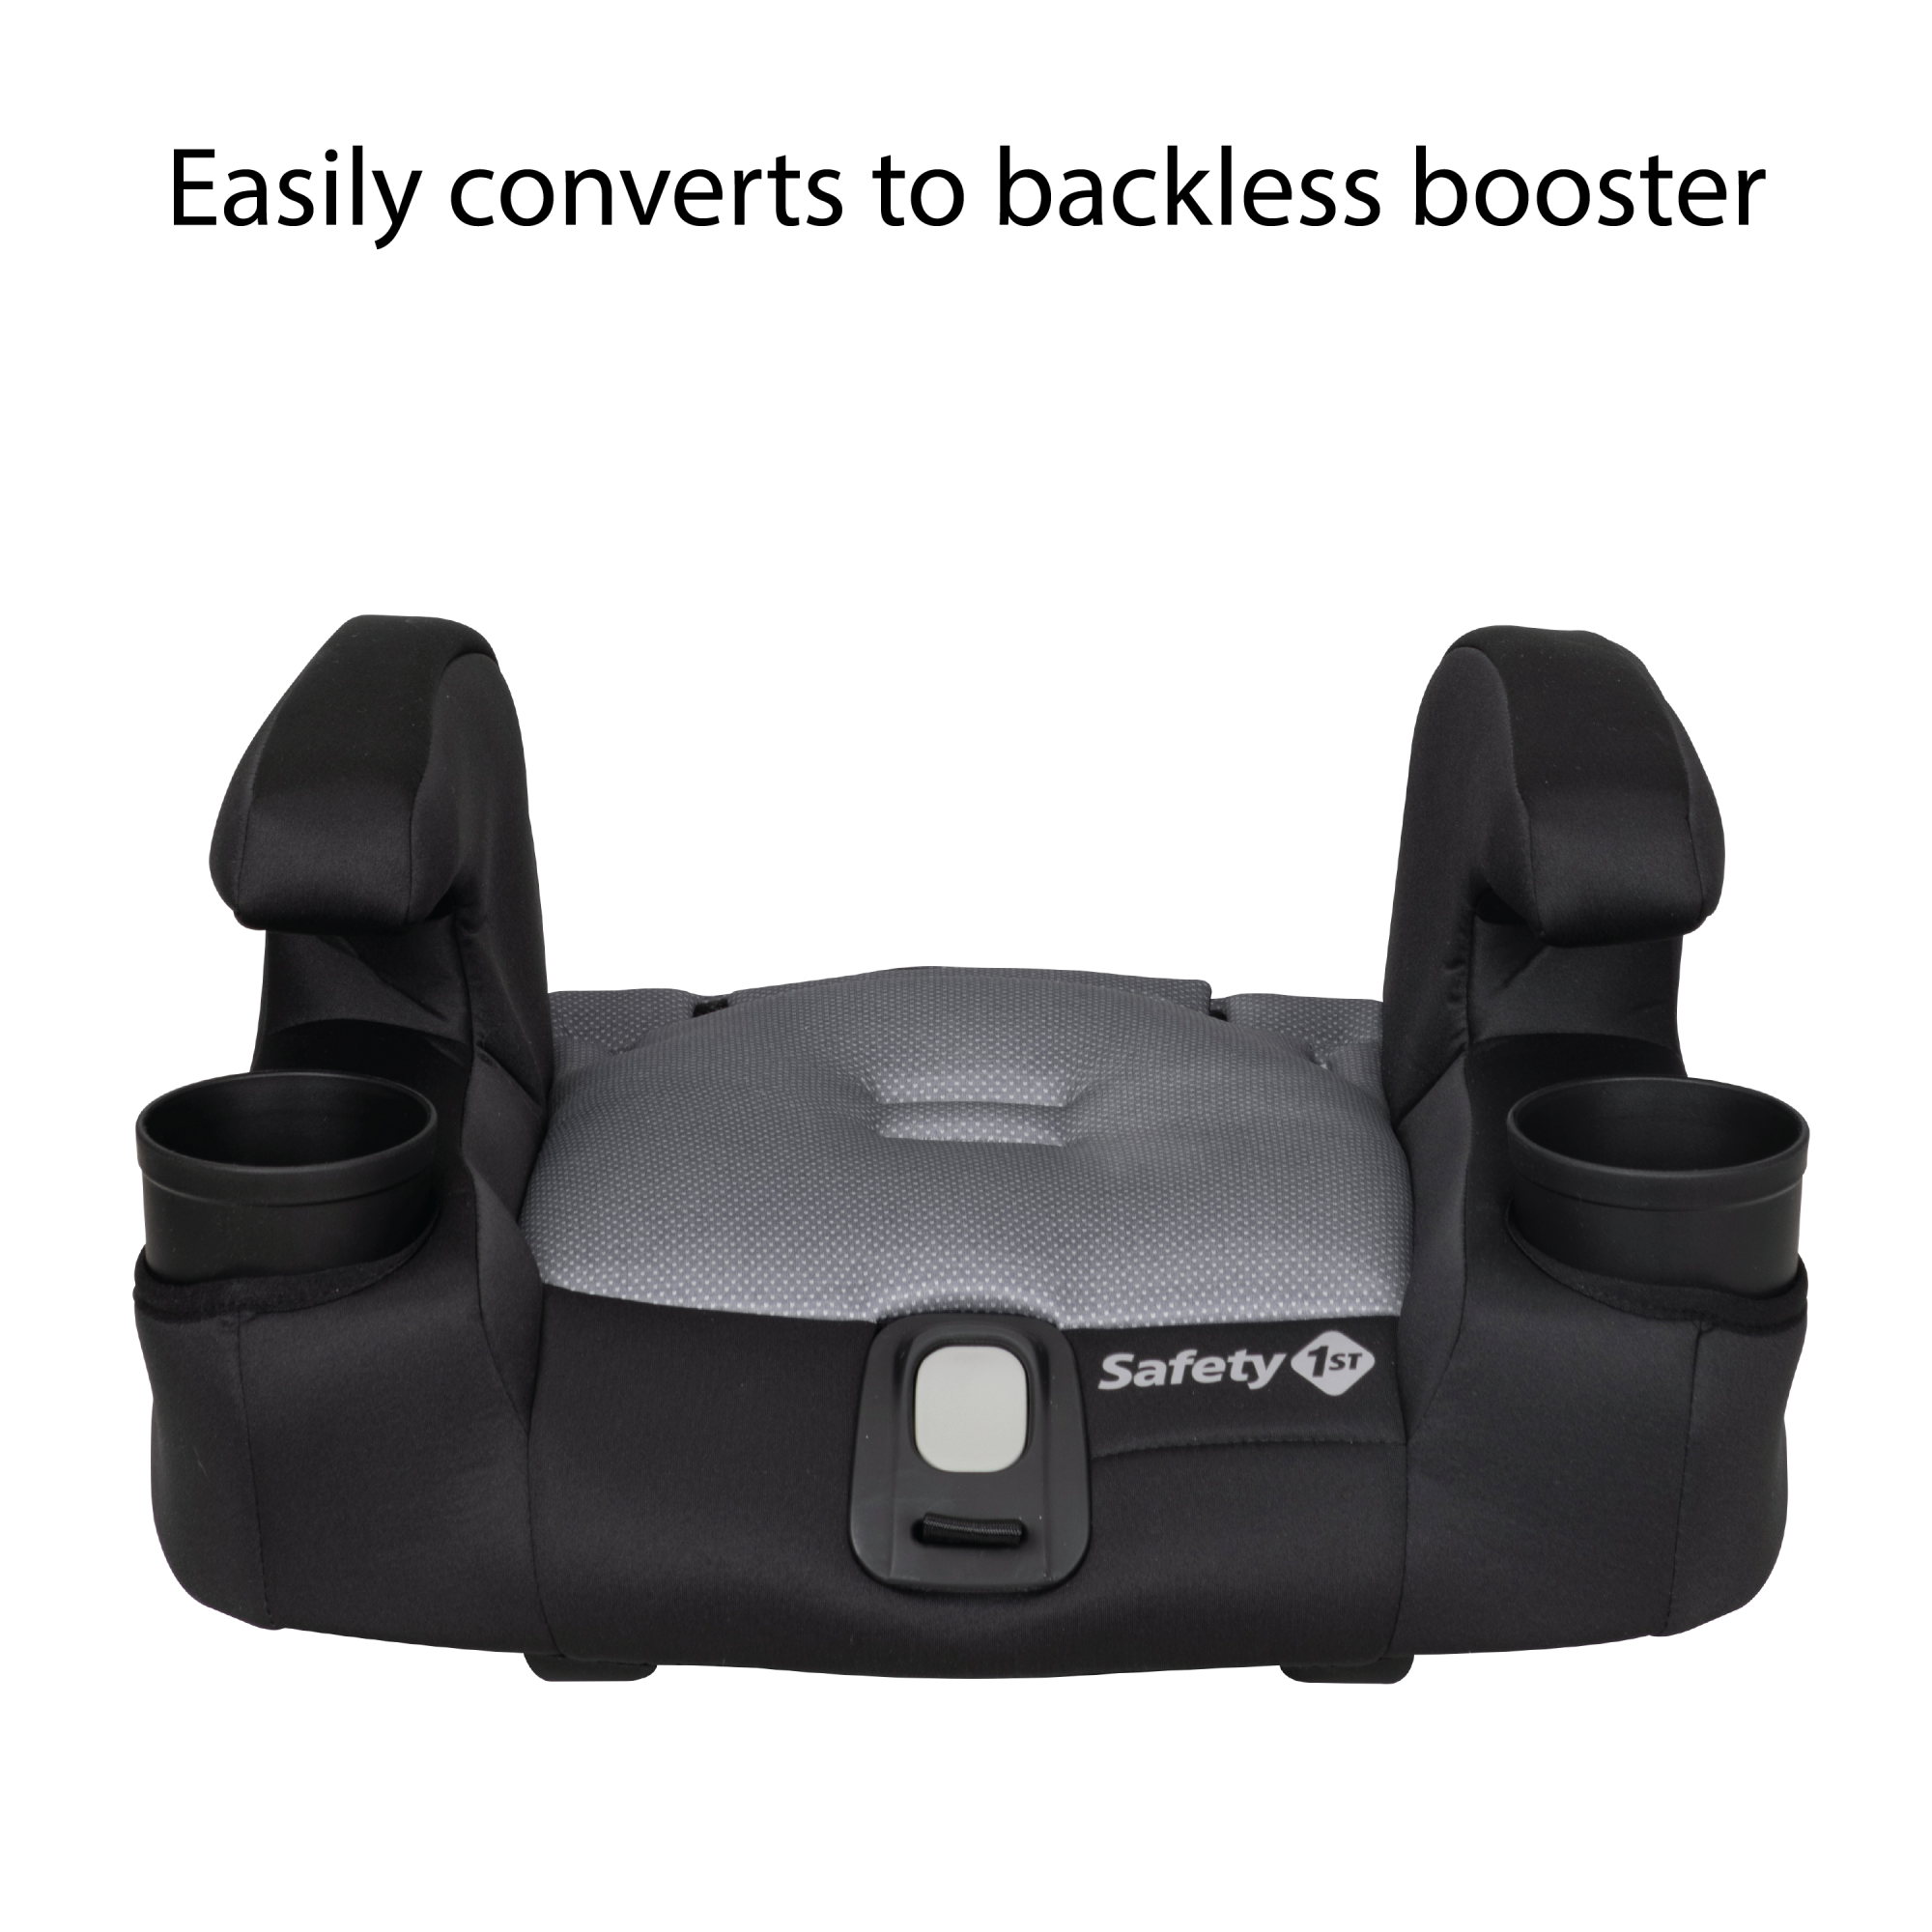 Boost-and-Go All-in-One Harness Booster Car Seat - backless booster 40-100 lbs.